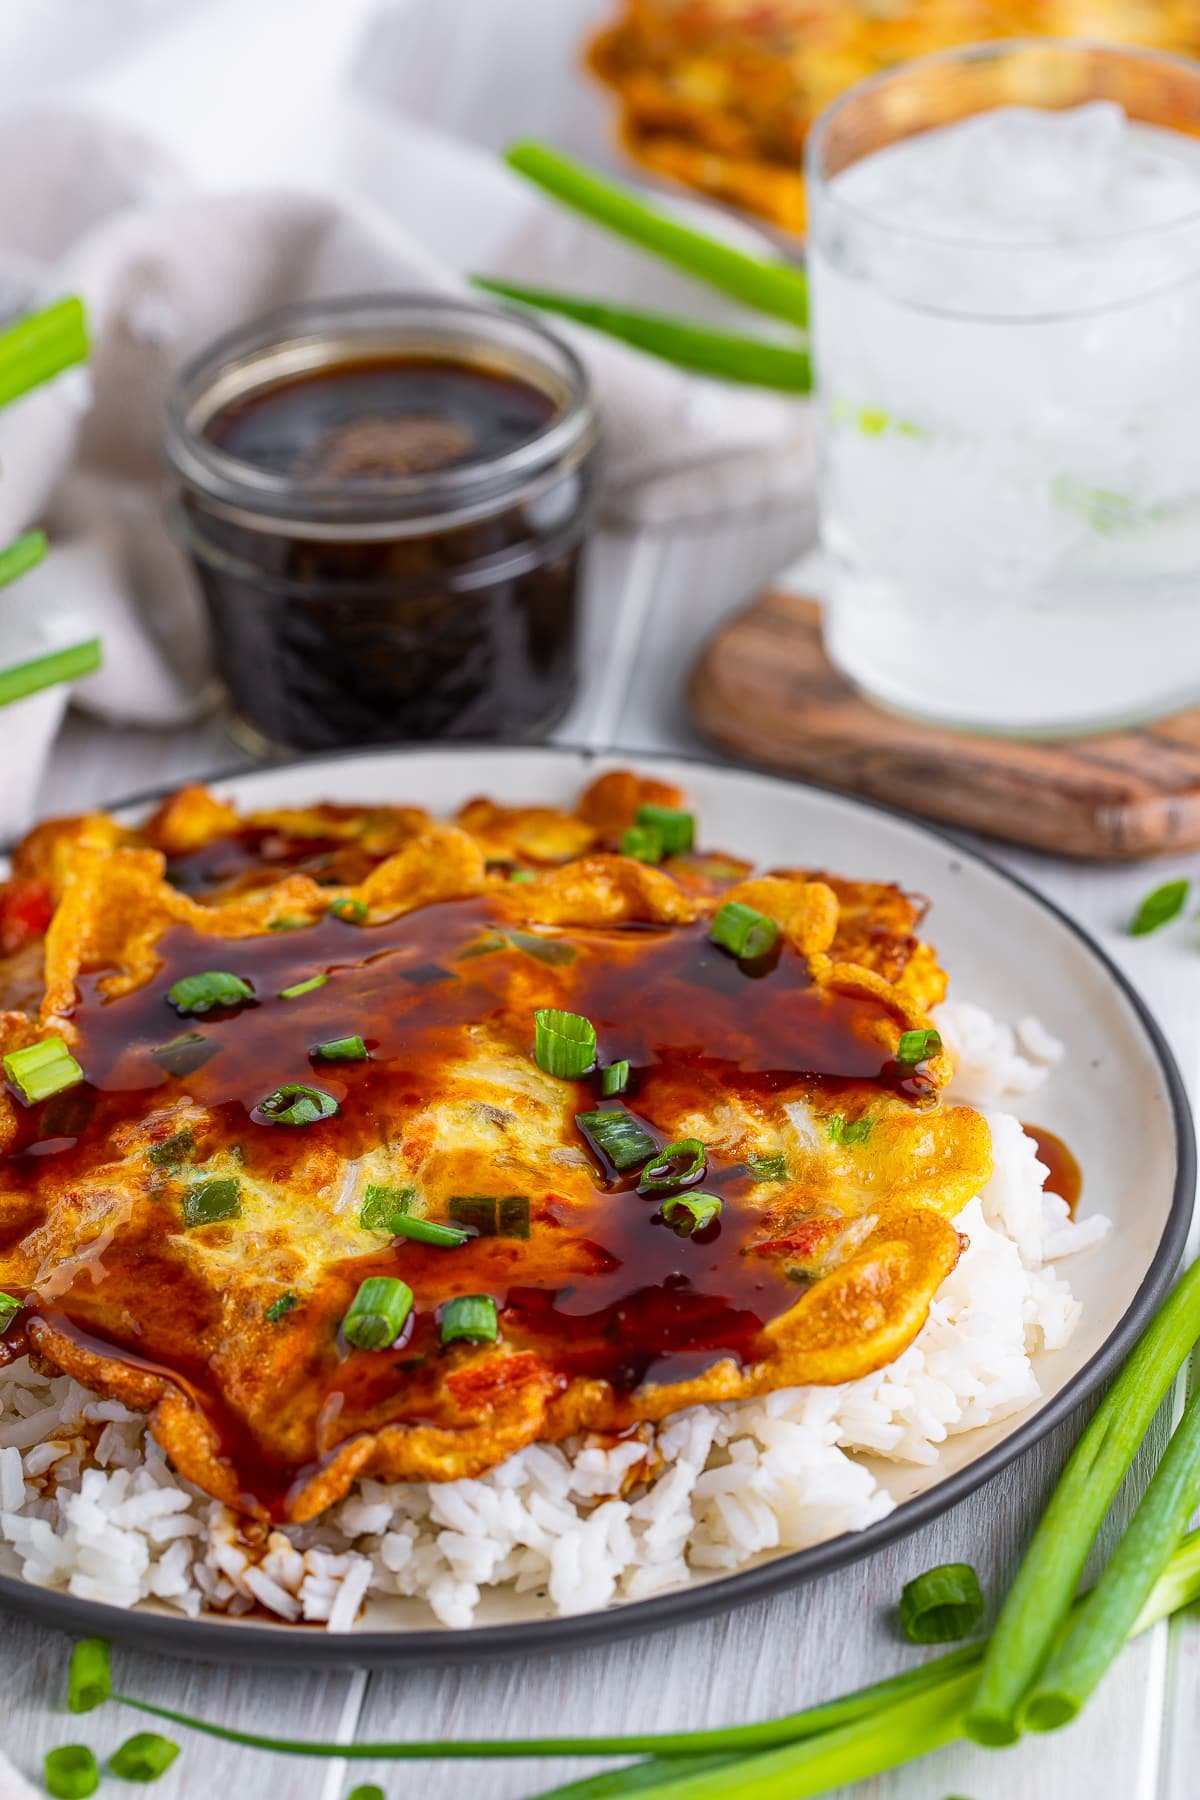 Vegetable Egg Foo Young Recipe on a white wooden table top with glass of ice water, scallions, and jar of sauce in the background.